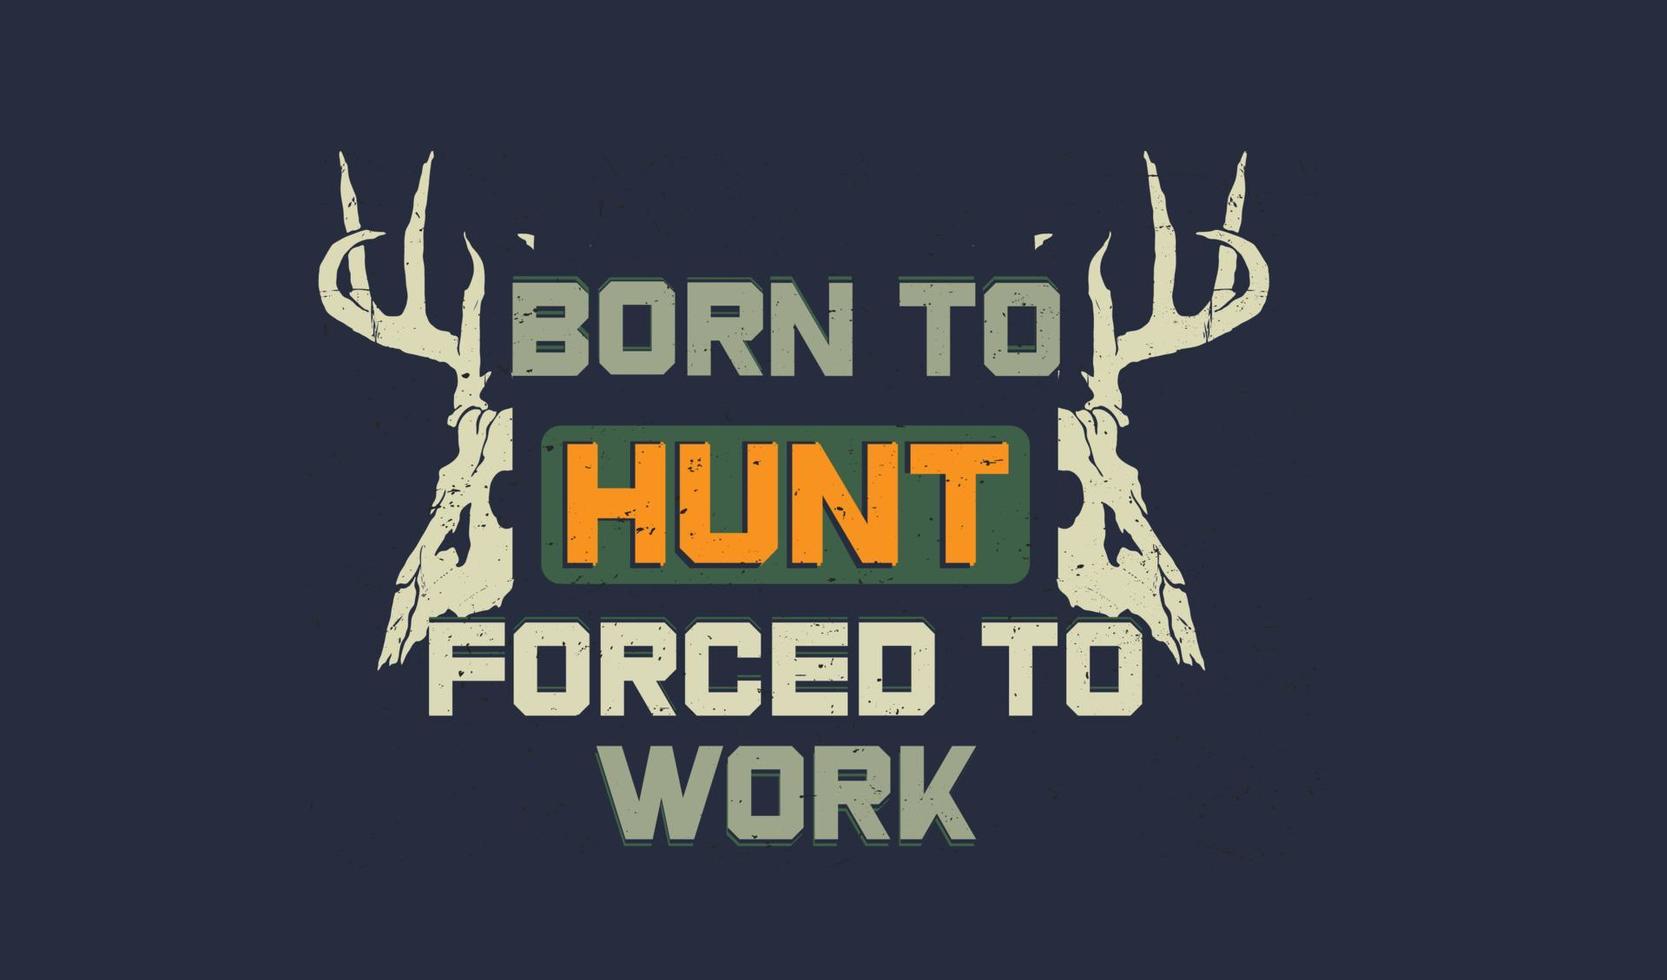 Born to hunt forced to work quotes print t-shirt design. vector